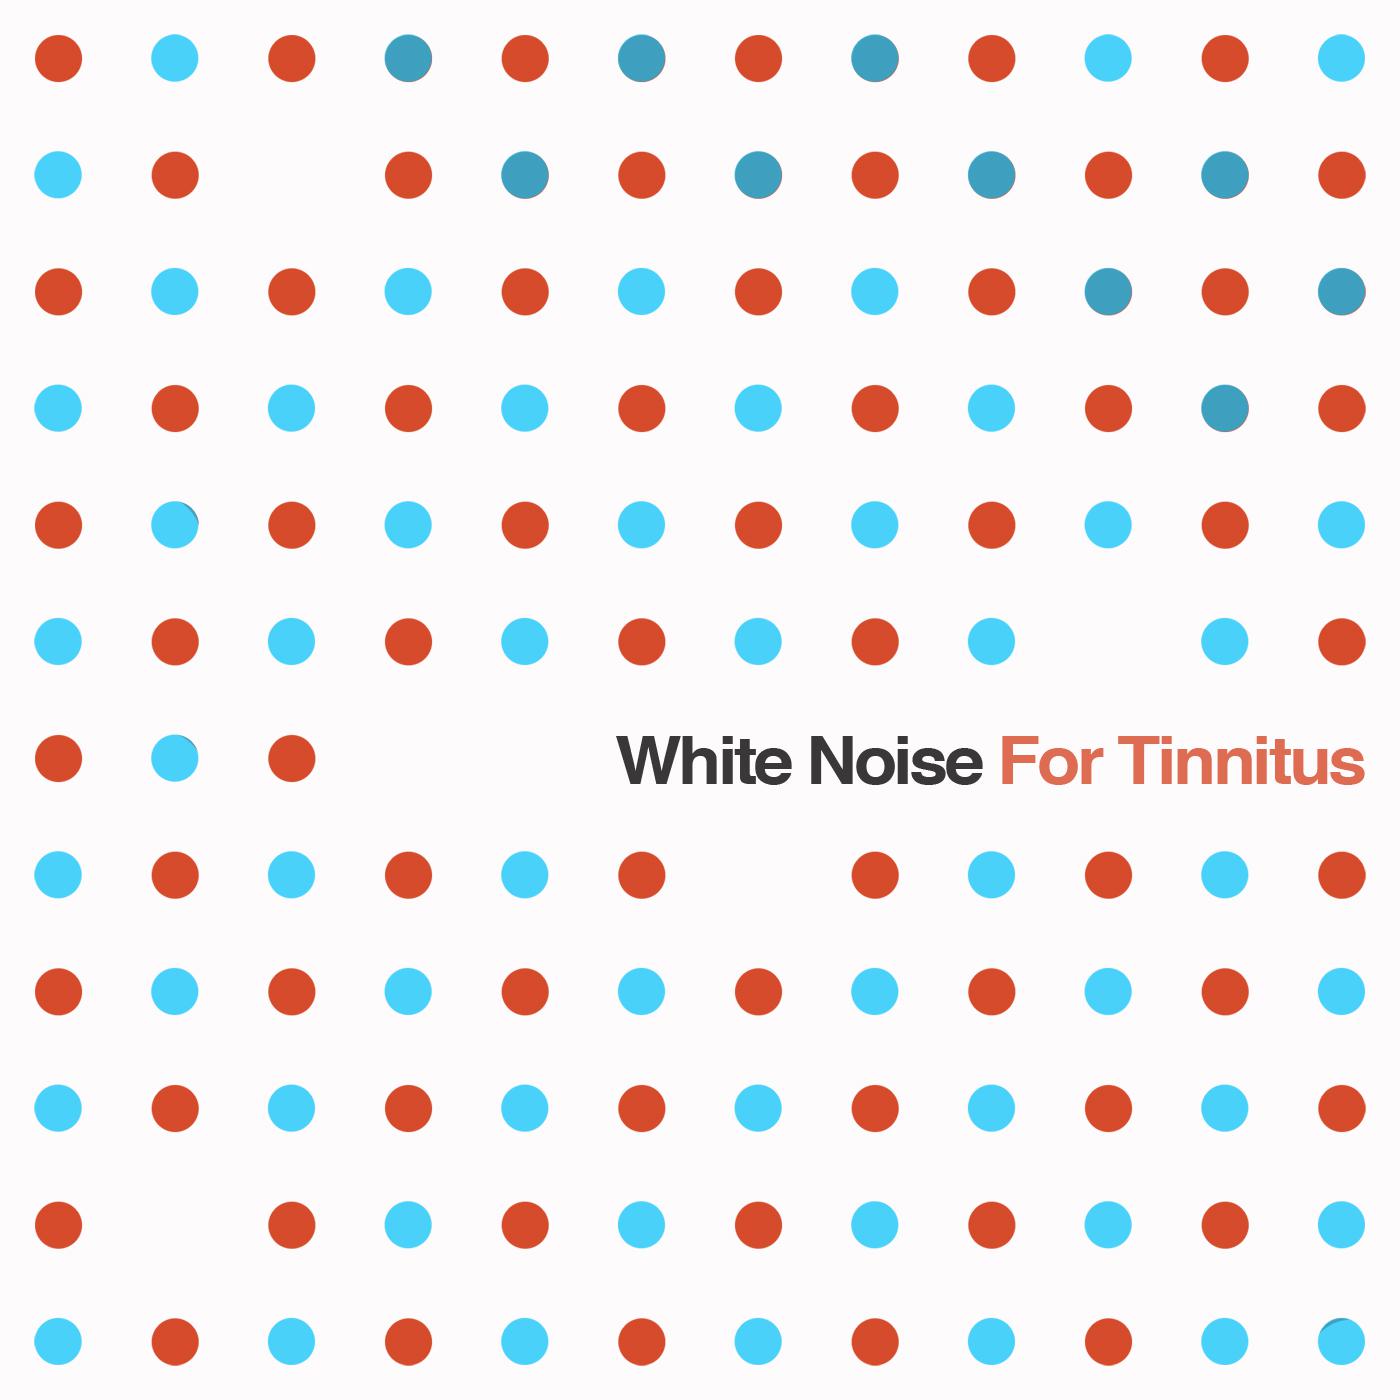 White Noise for Tinnitus: Sound Masking System for Relaxation